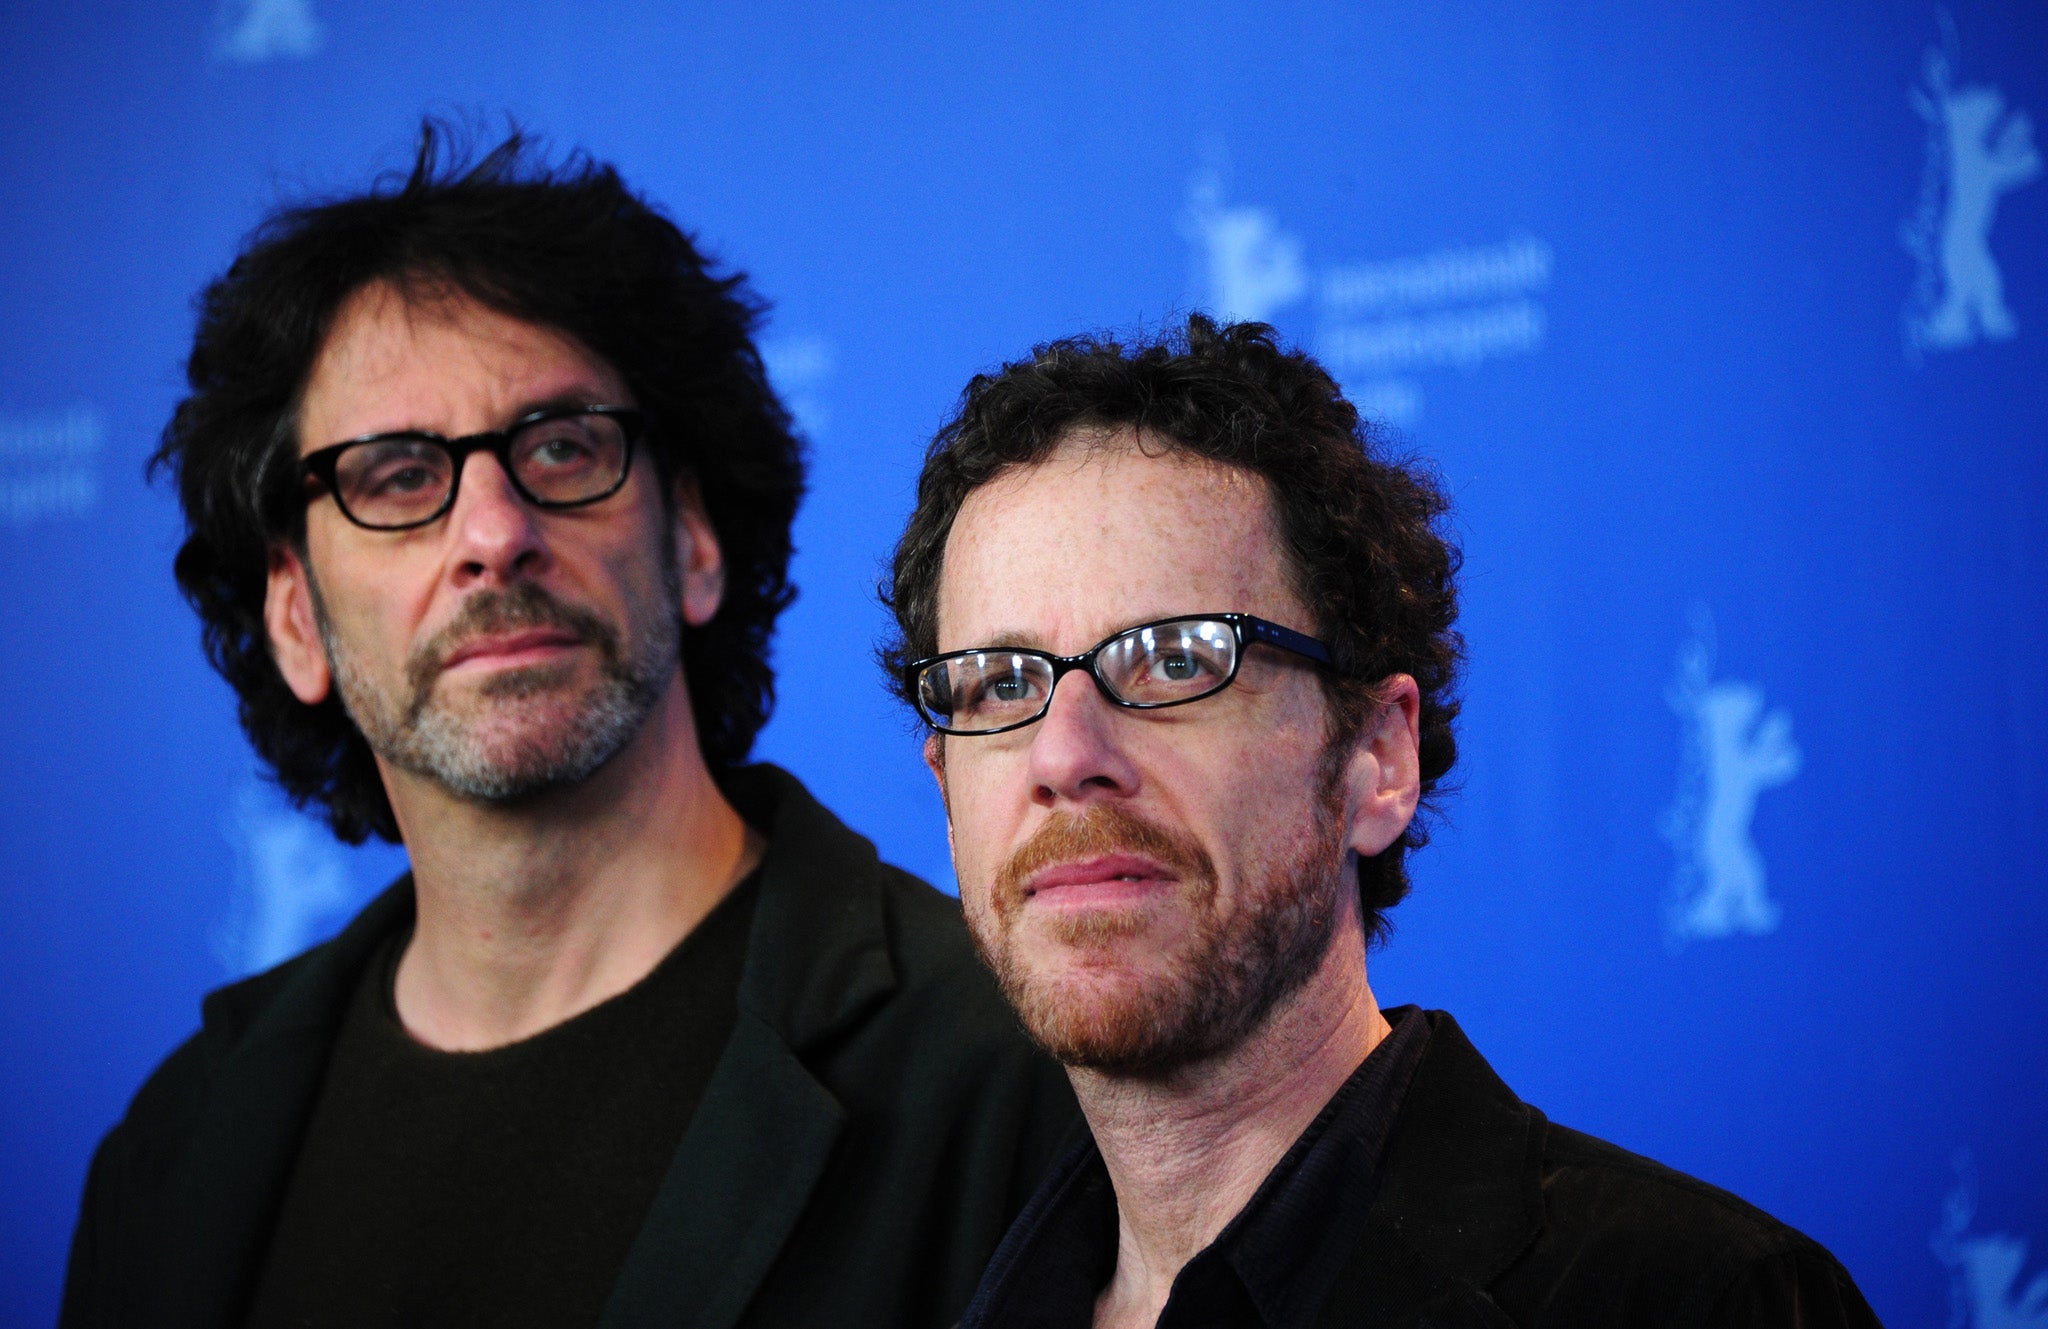 Film-making duo Joel and Ethan Coen are due to pen the scrip to Steven Spielberg's new project